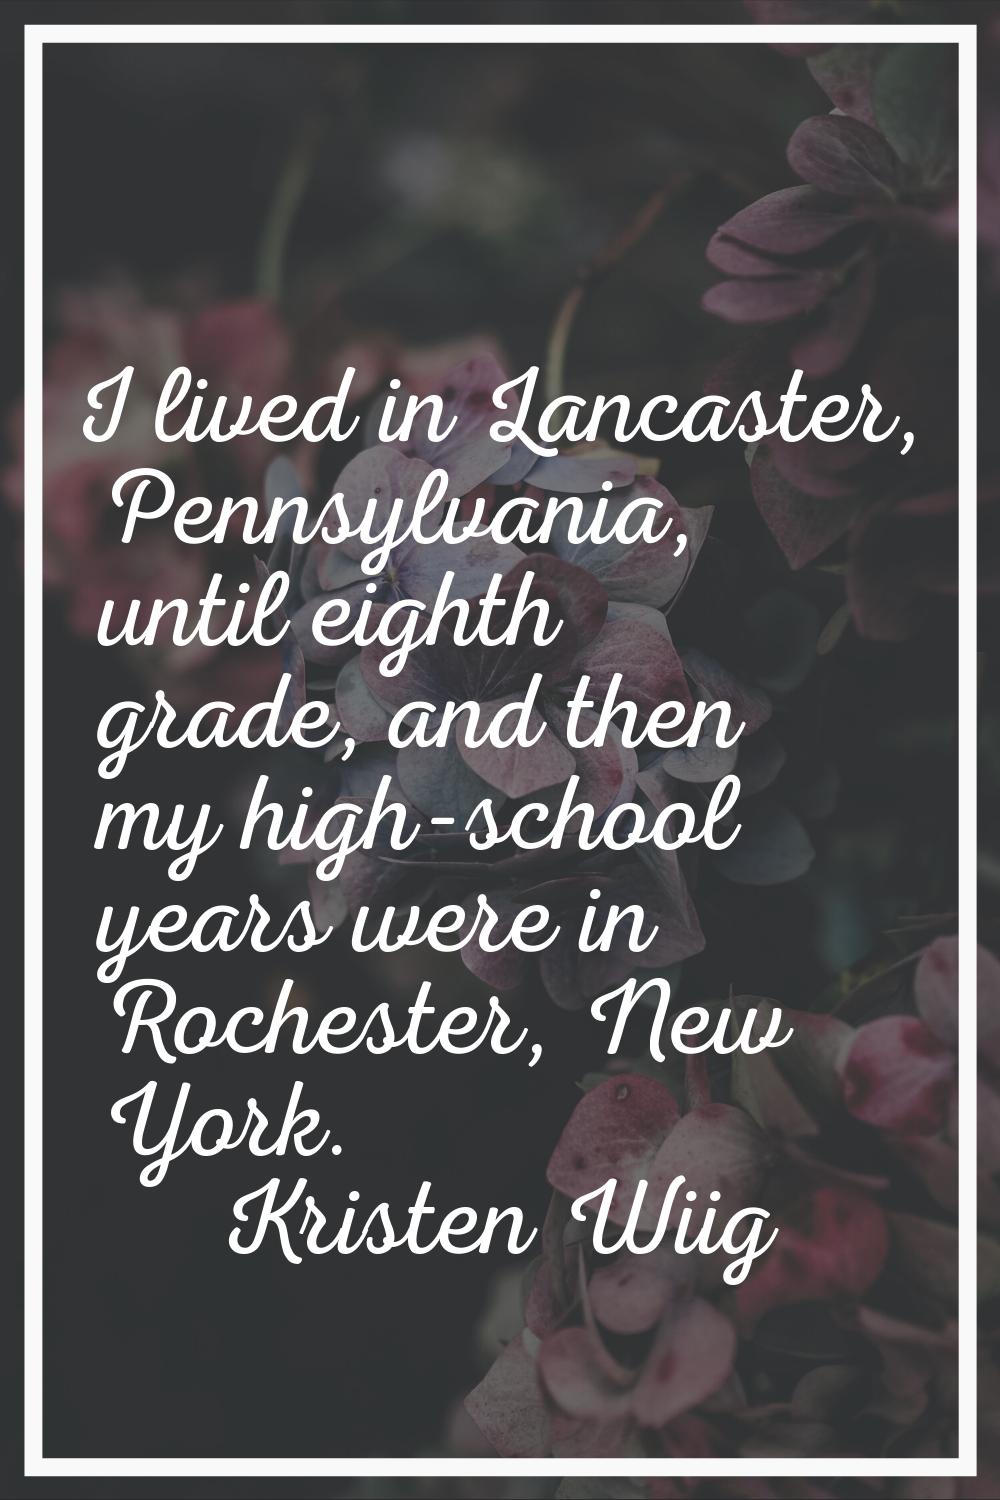 I lived in Lancaster, Pennsylvania, until eighth grade, and then my high-school years were in Roche